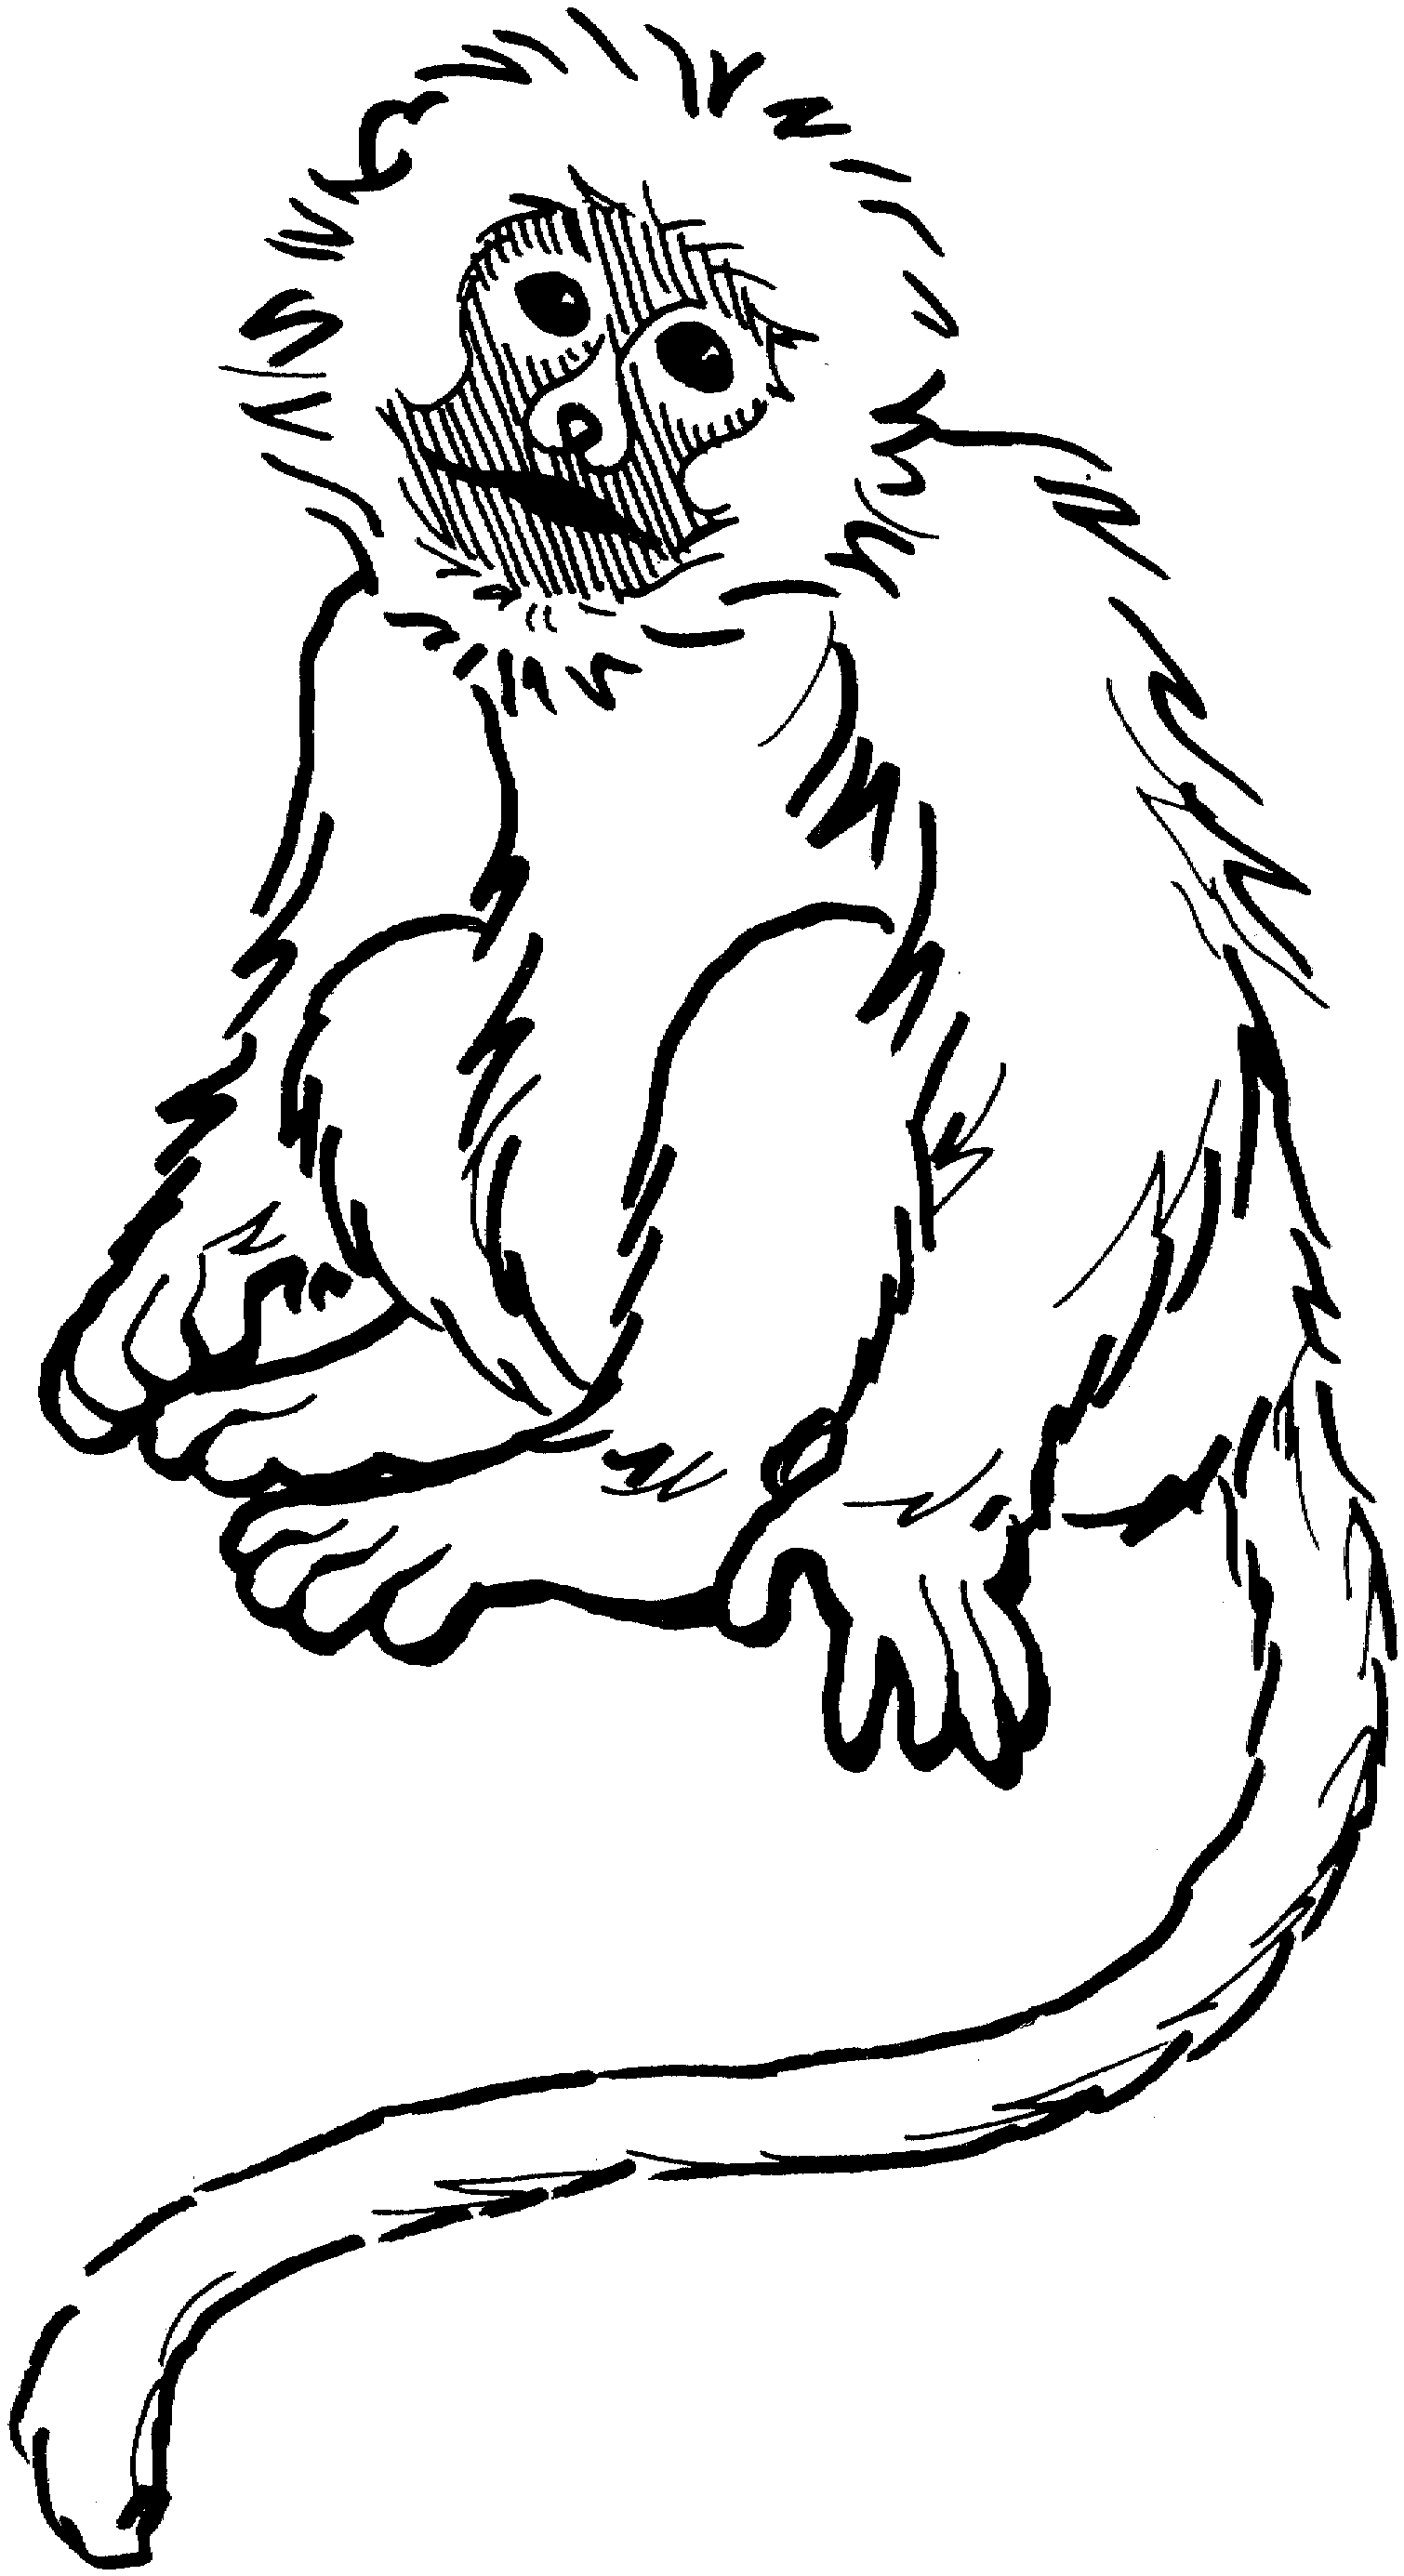 Spider Monkey clipart #19, Download drawings